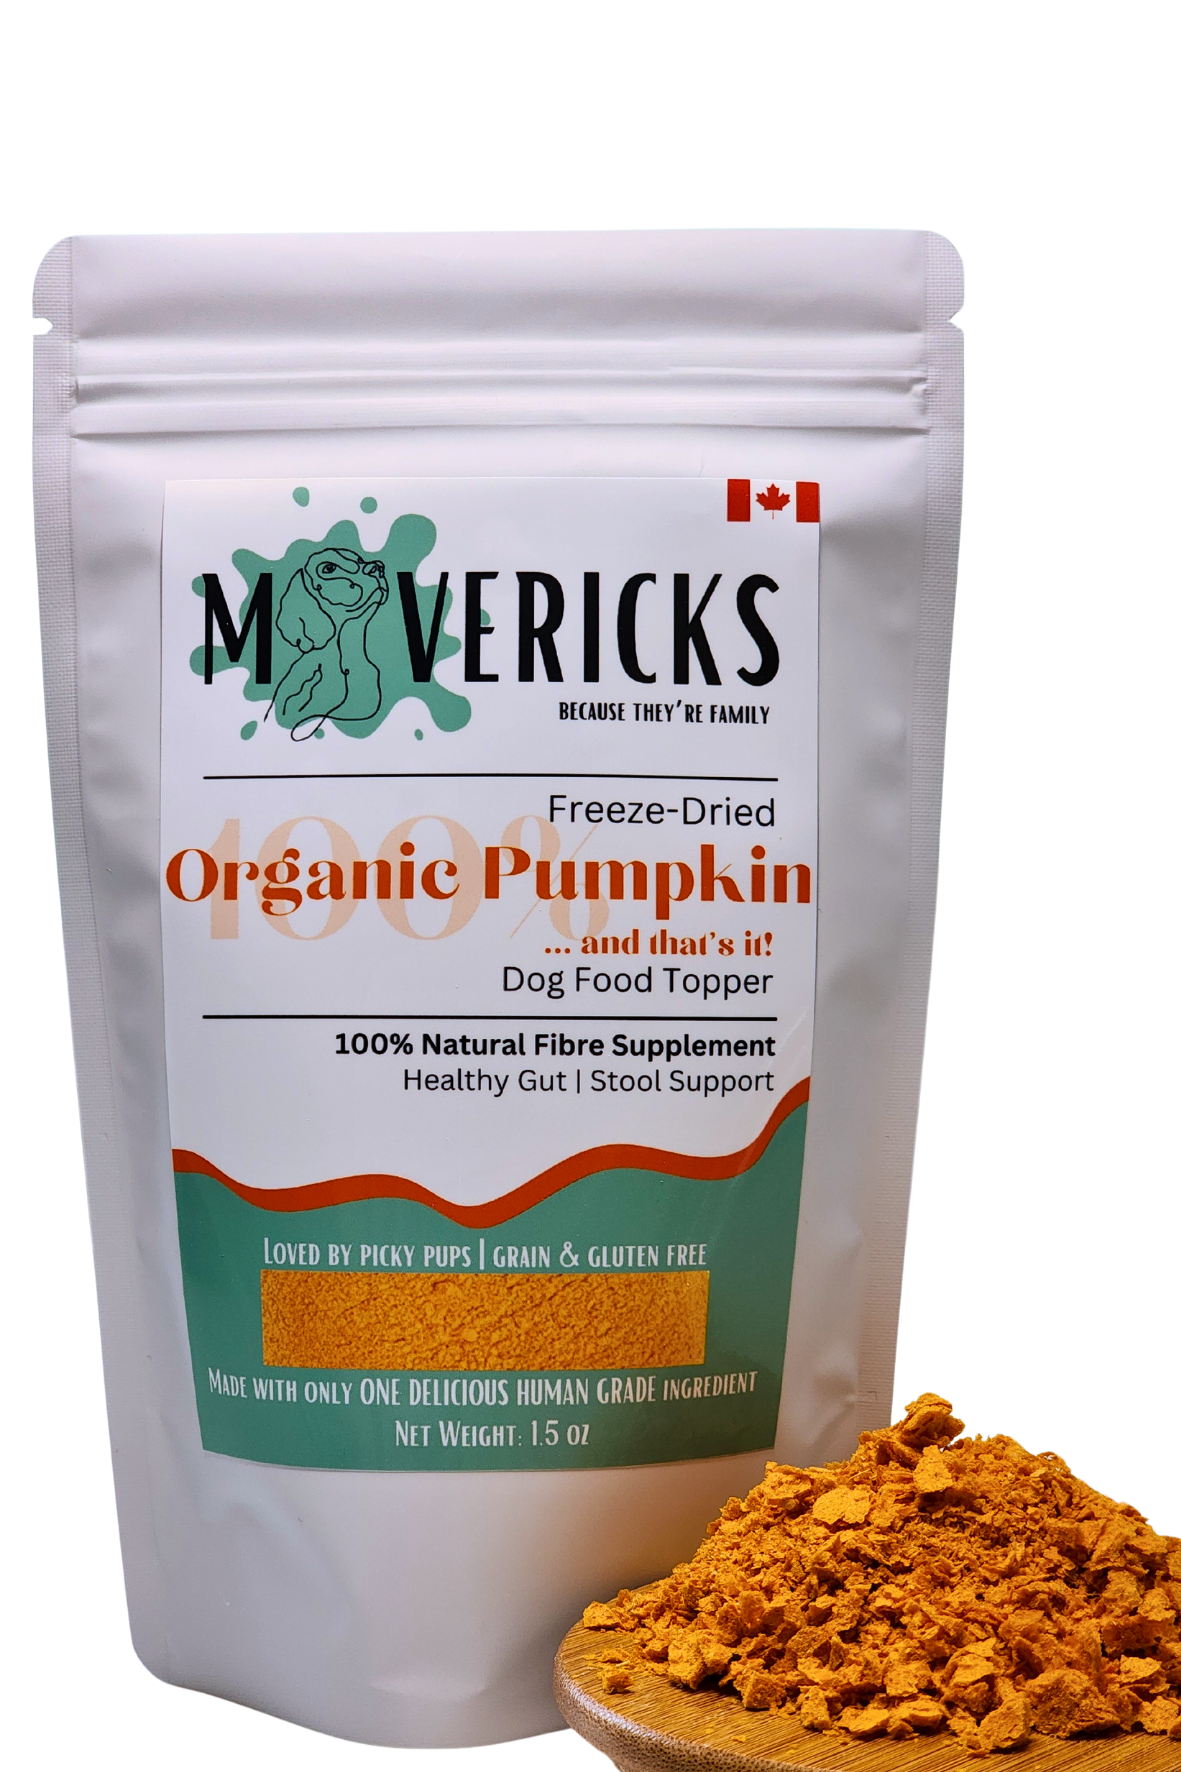 Freeze Dried Organic Pumpkin for Dogs - Gut & Stool Support Dog Food Topper